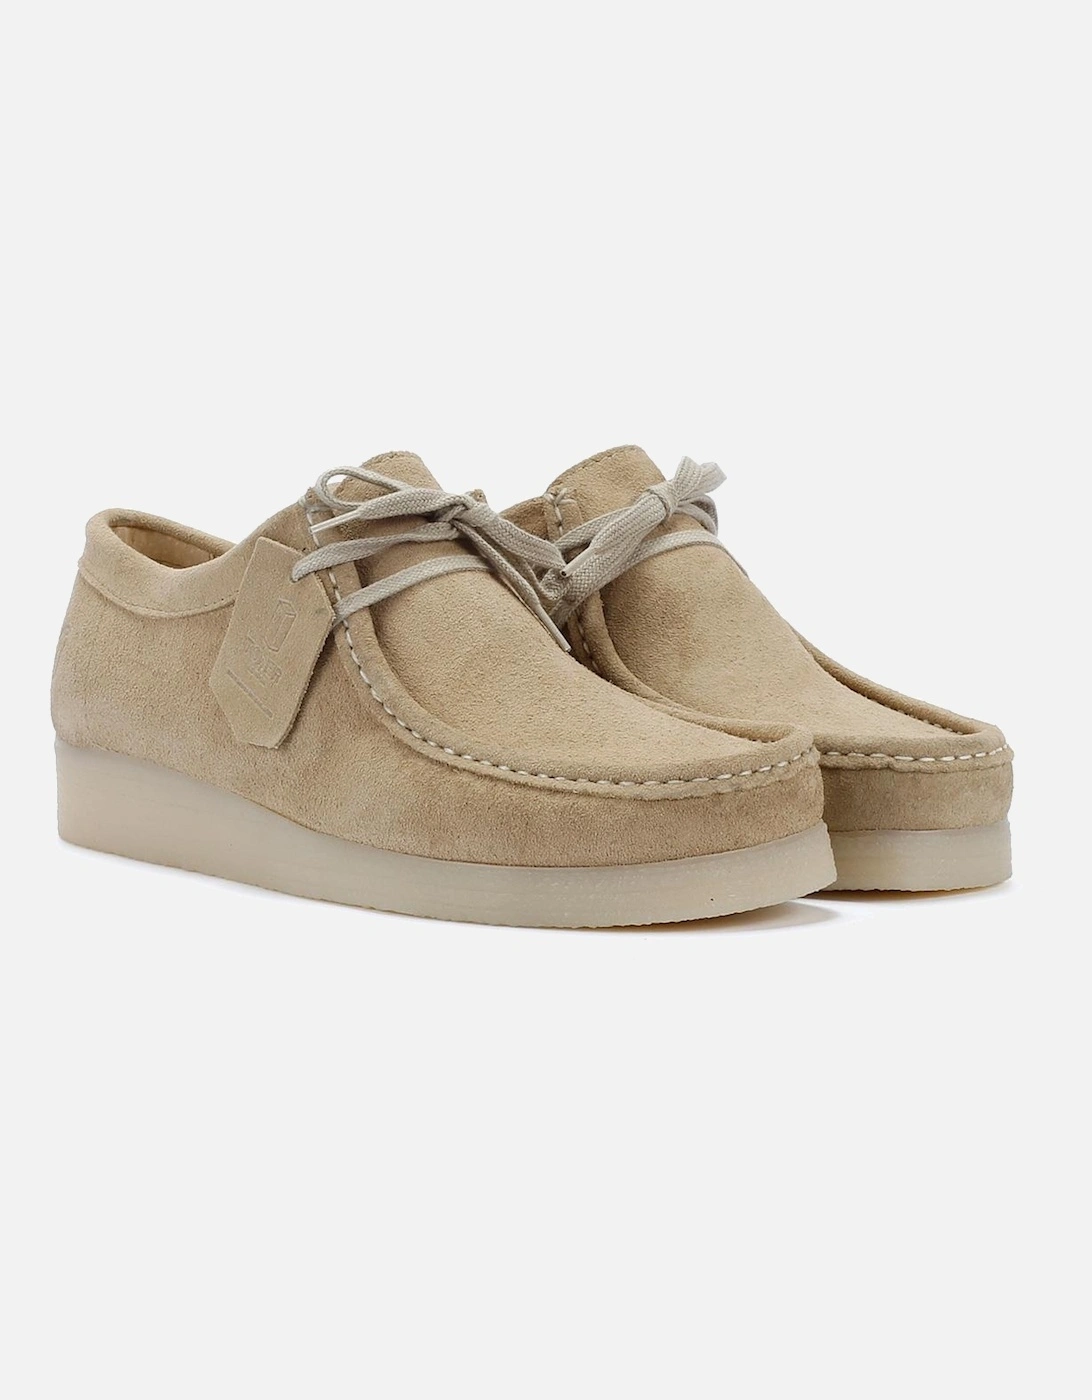 TOWER London Apache Sand Suede Shoes, 9 of 8